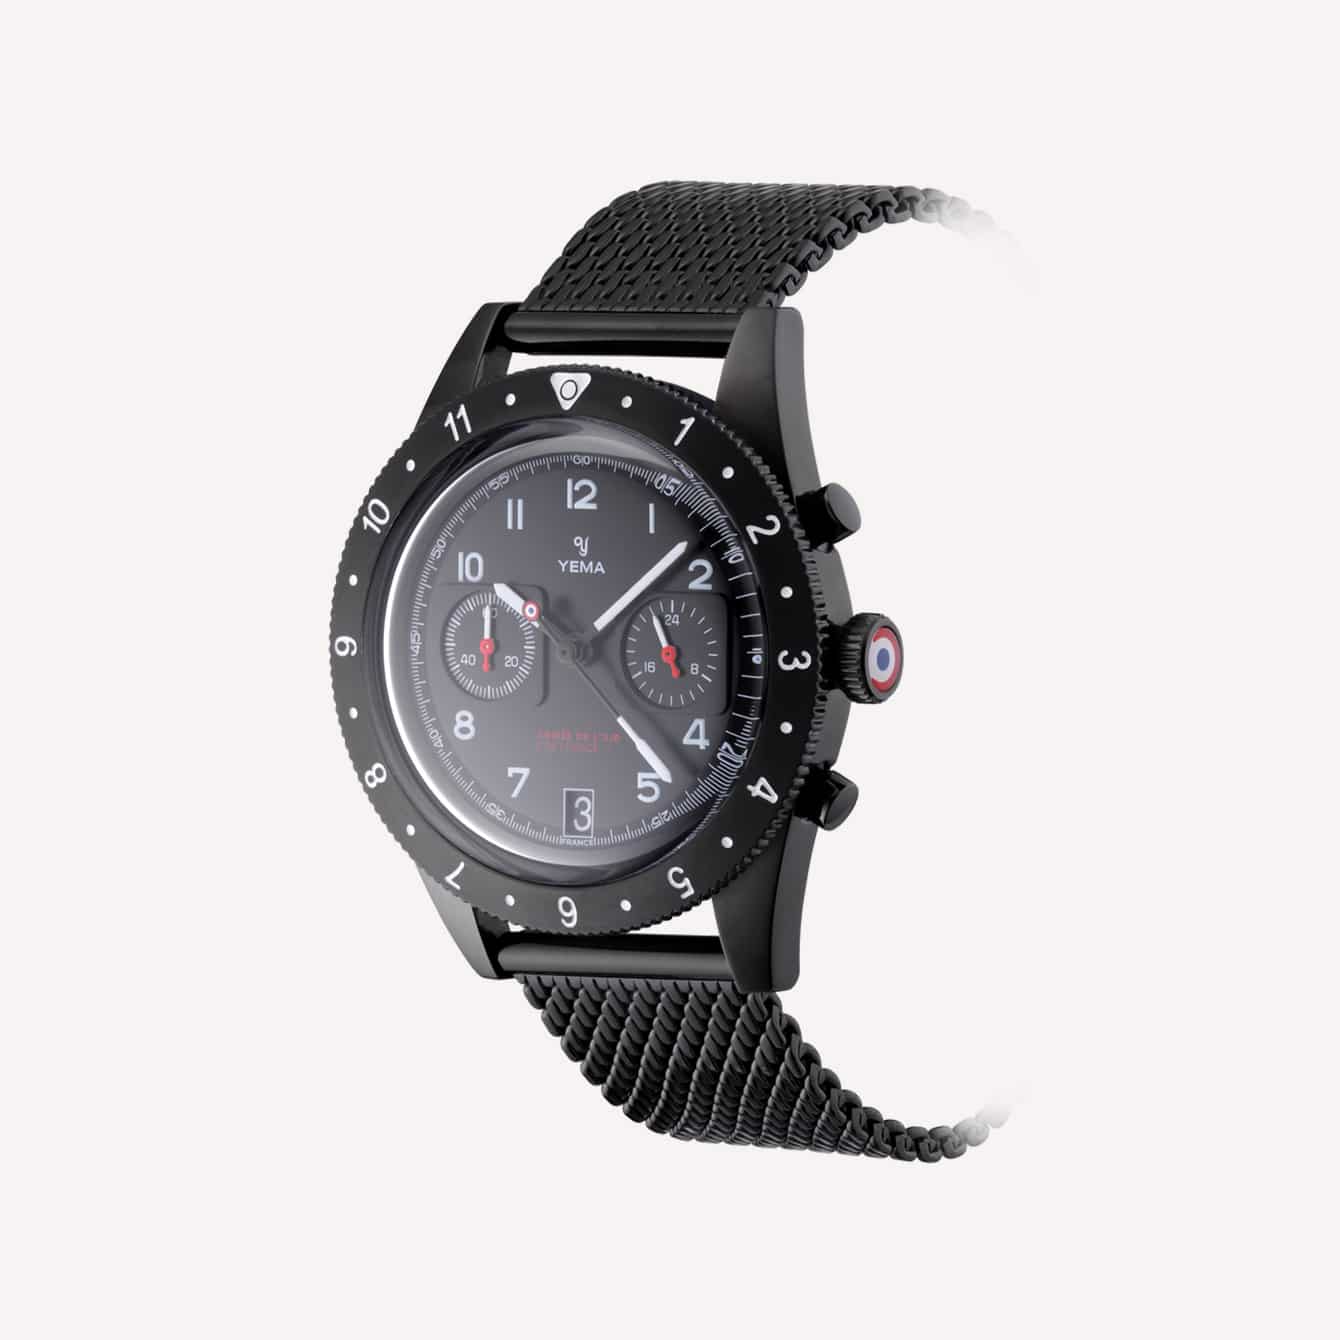 15 Best Military Watches • The Slender Wrist